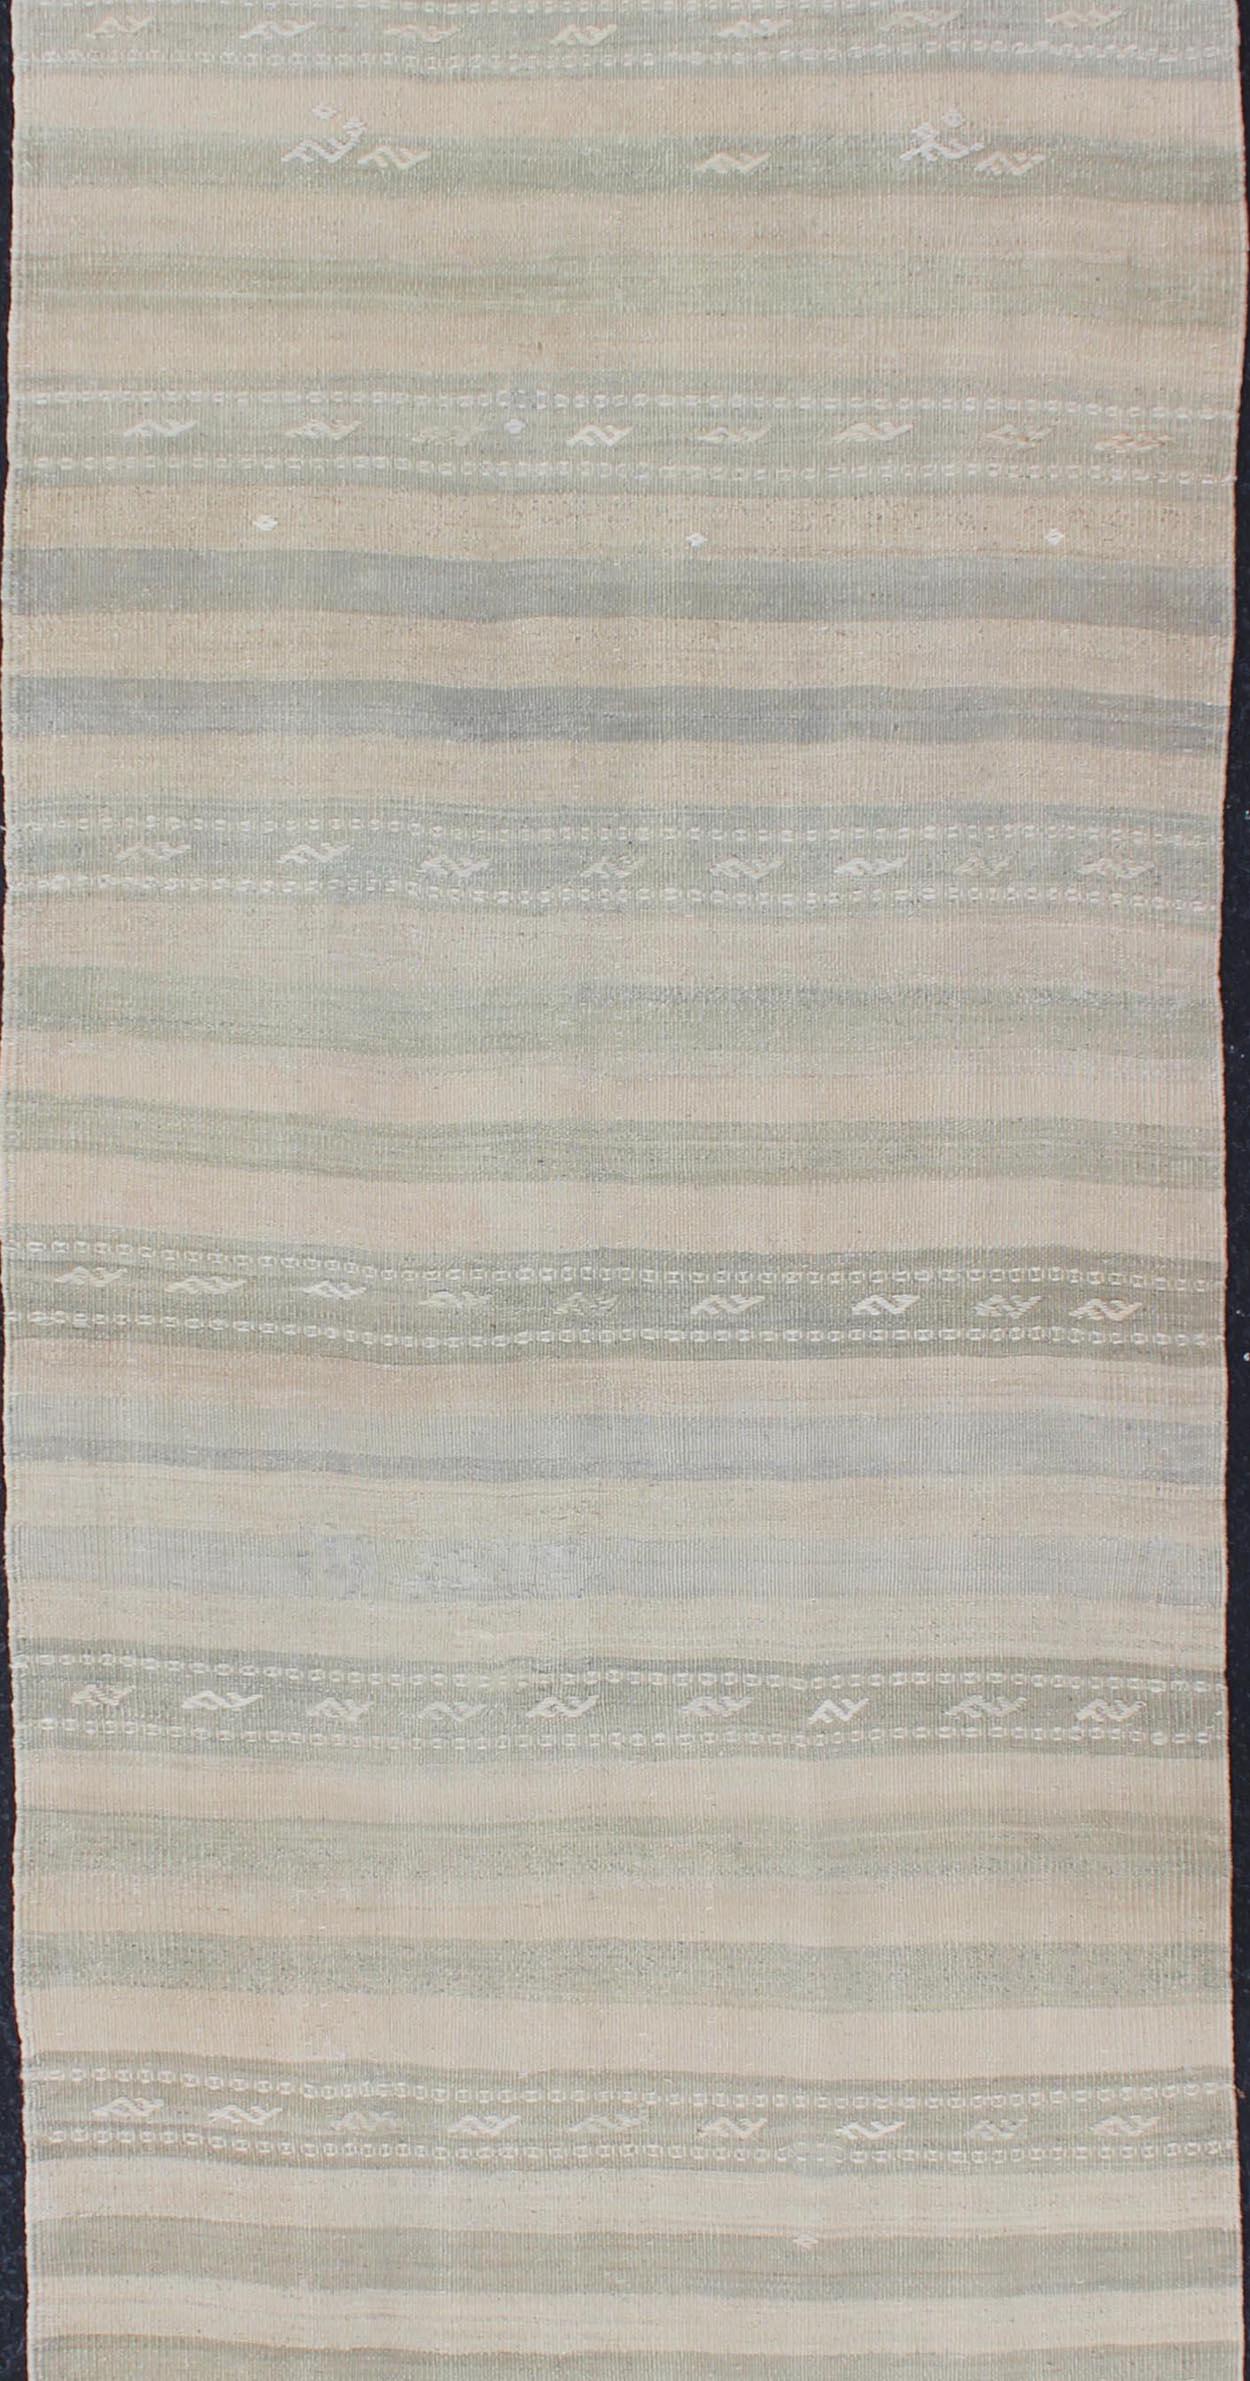 Persian Vintage Turkish Kilim Runner with Stripes in Light Taupe and Neutral Tones For Sale